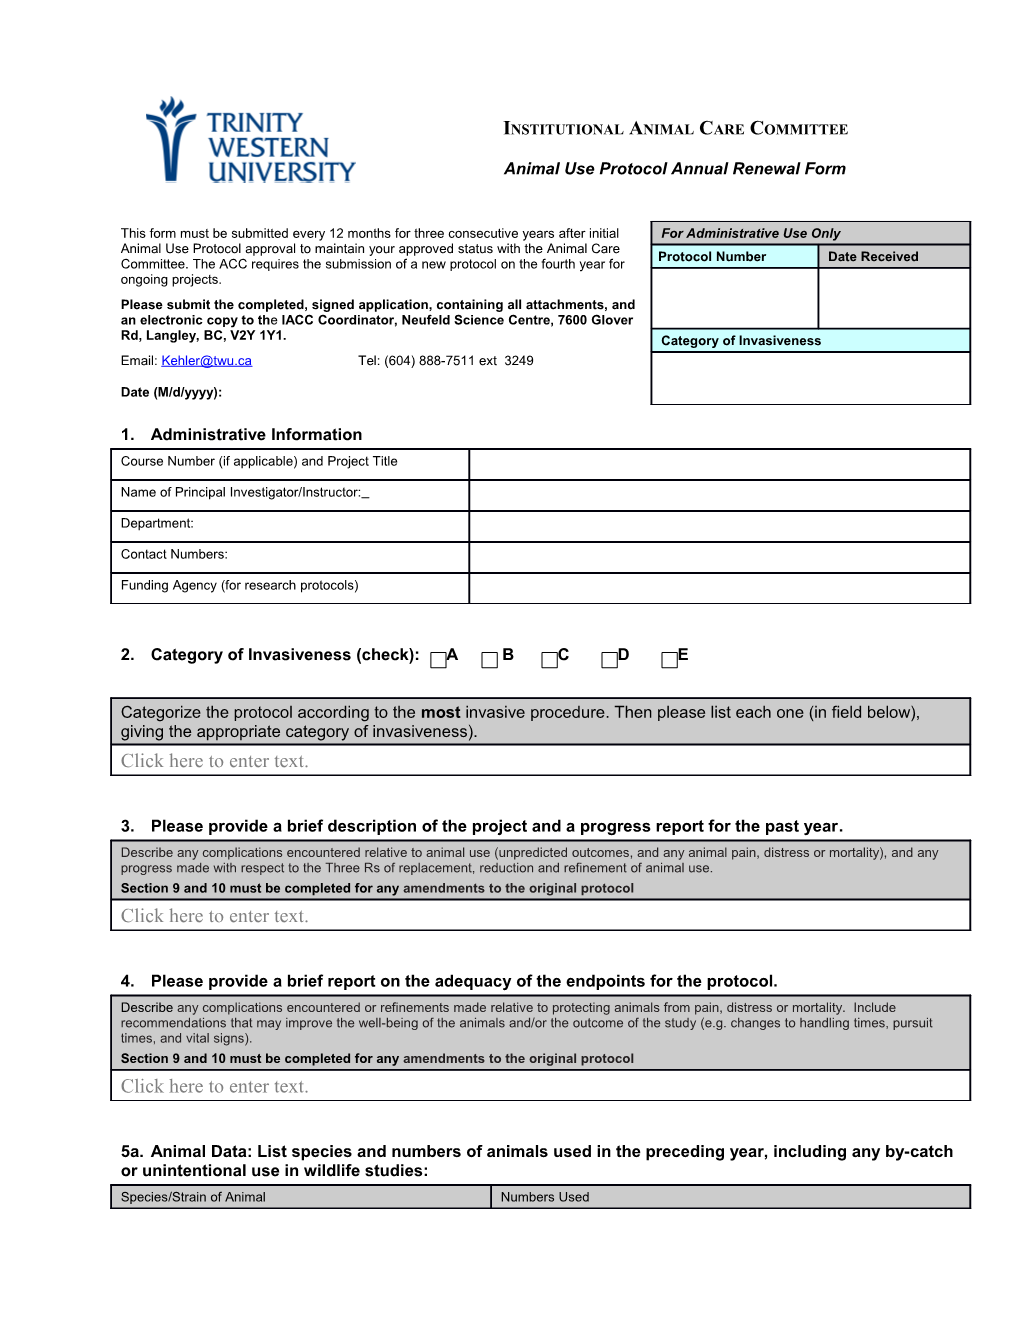 IACC AUP Annual Renewal Form